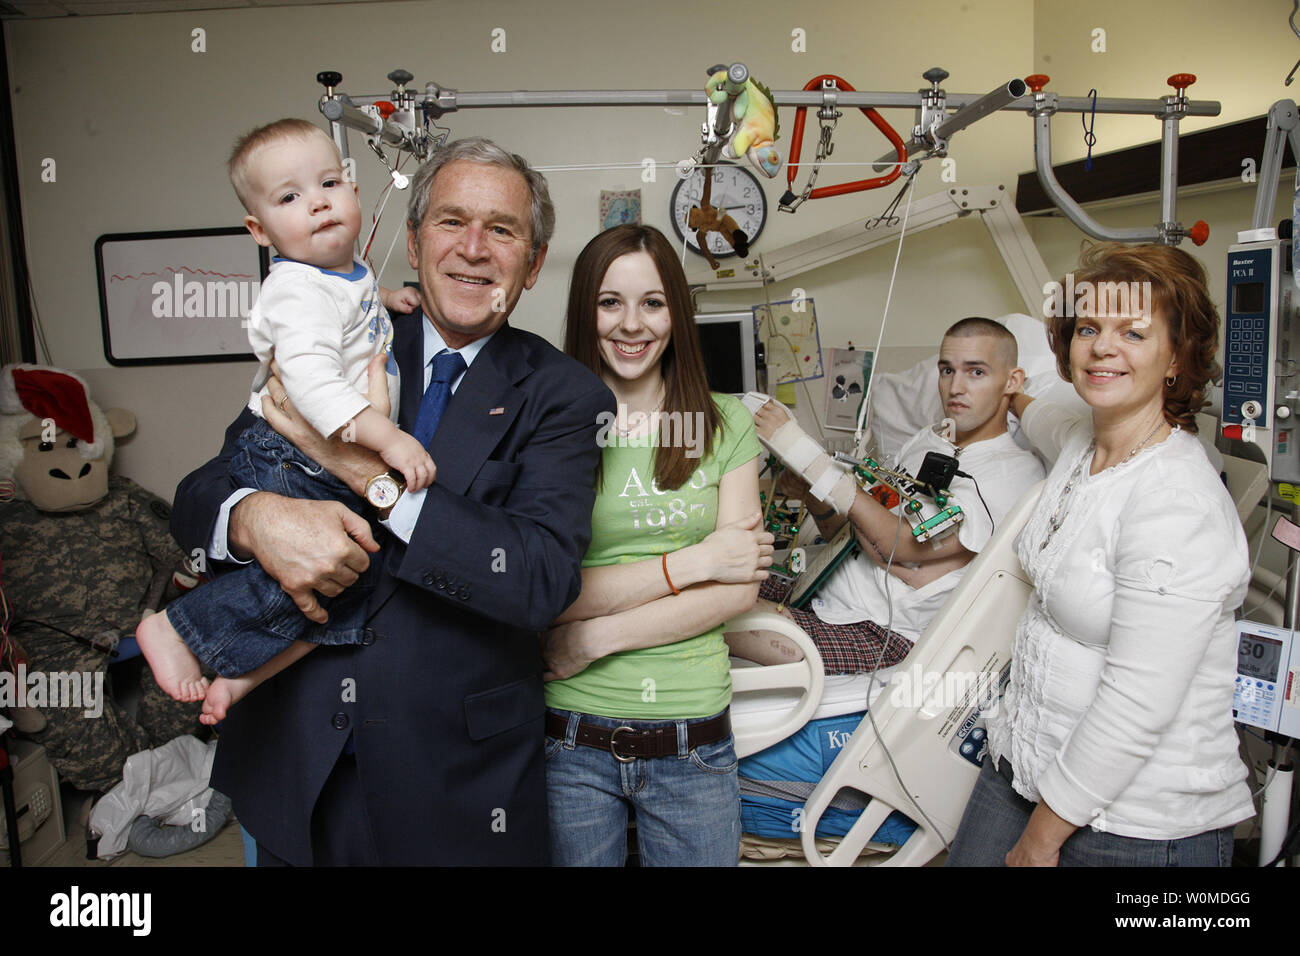 President George W. Bush poses for a picture with the family of U.S. Army Cpl. Isaac Jensen of Layton, Utah on December 22, 2008 in Washington D.C., during a visit to Walter Reed Army Medical Center, where the soldier is recovering from injuries suffered in the war in Iraq.  (L-R)  son James (15 months), Bush, wife Bethany,  U.S. Army Cpl. Isaac Jensen,  and mother, Eva Francis.    (UPI Photo/Eric Draper/White House) Stock Photo